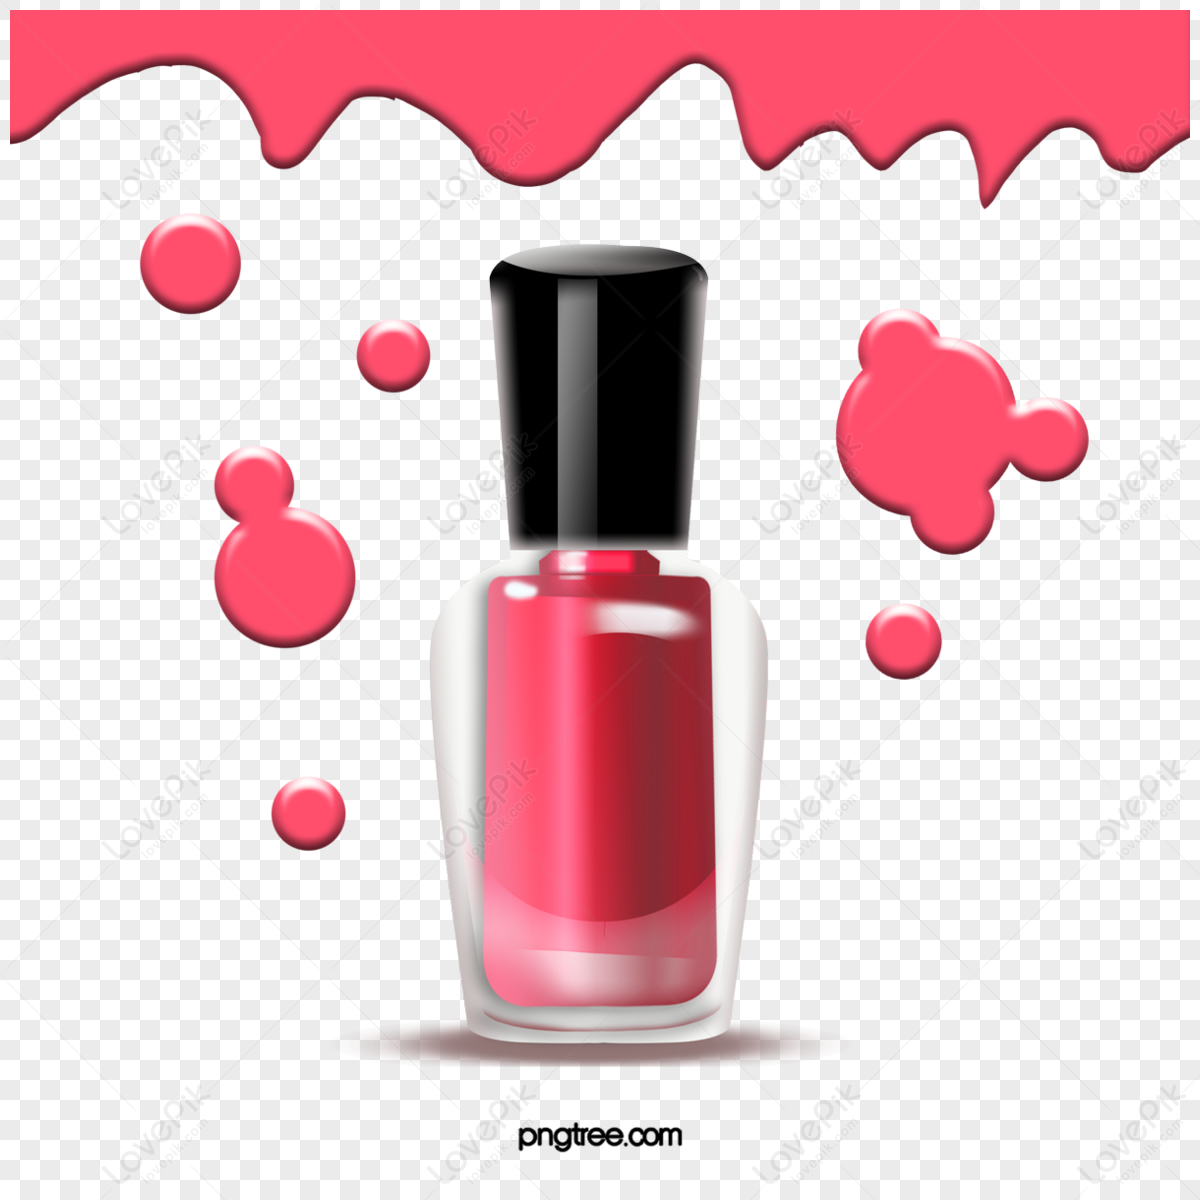 Bottles Different Colors Nail Polish Vector Stock Vector (Royalty Free)  121067347 | Shutterstock